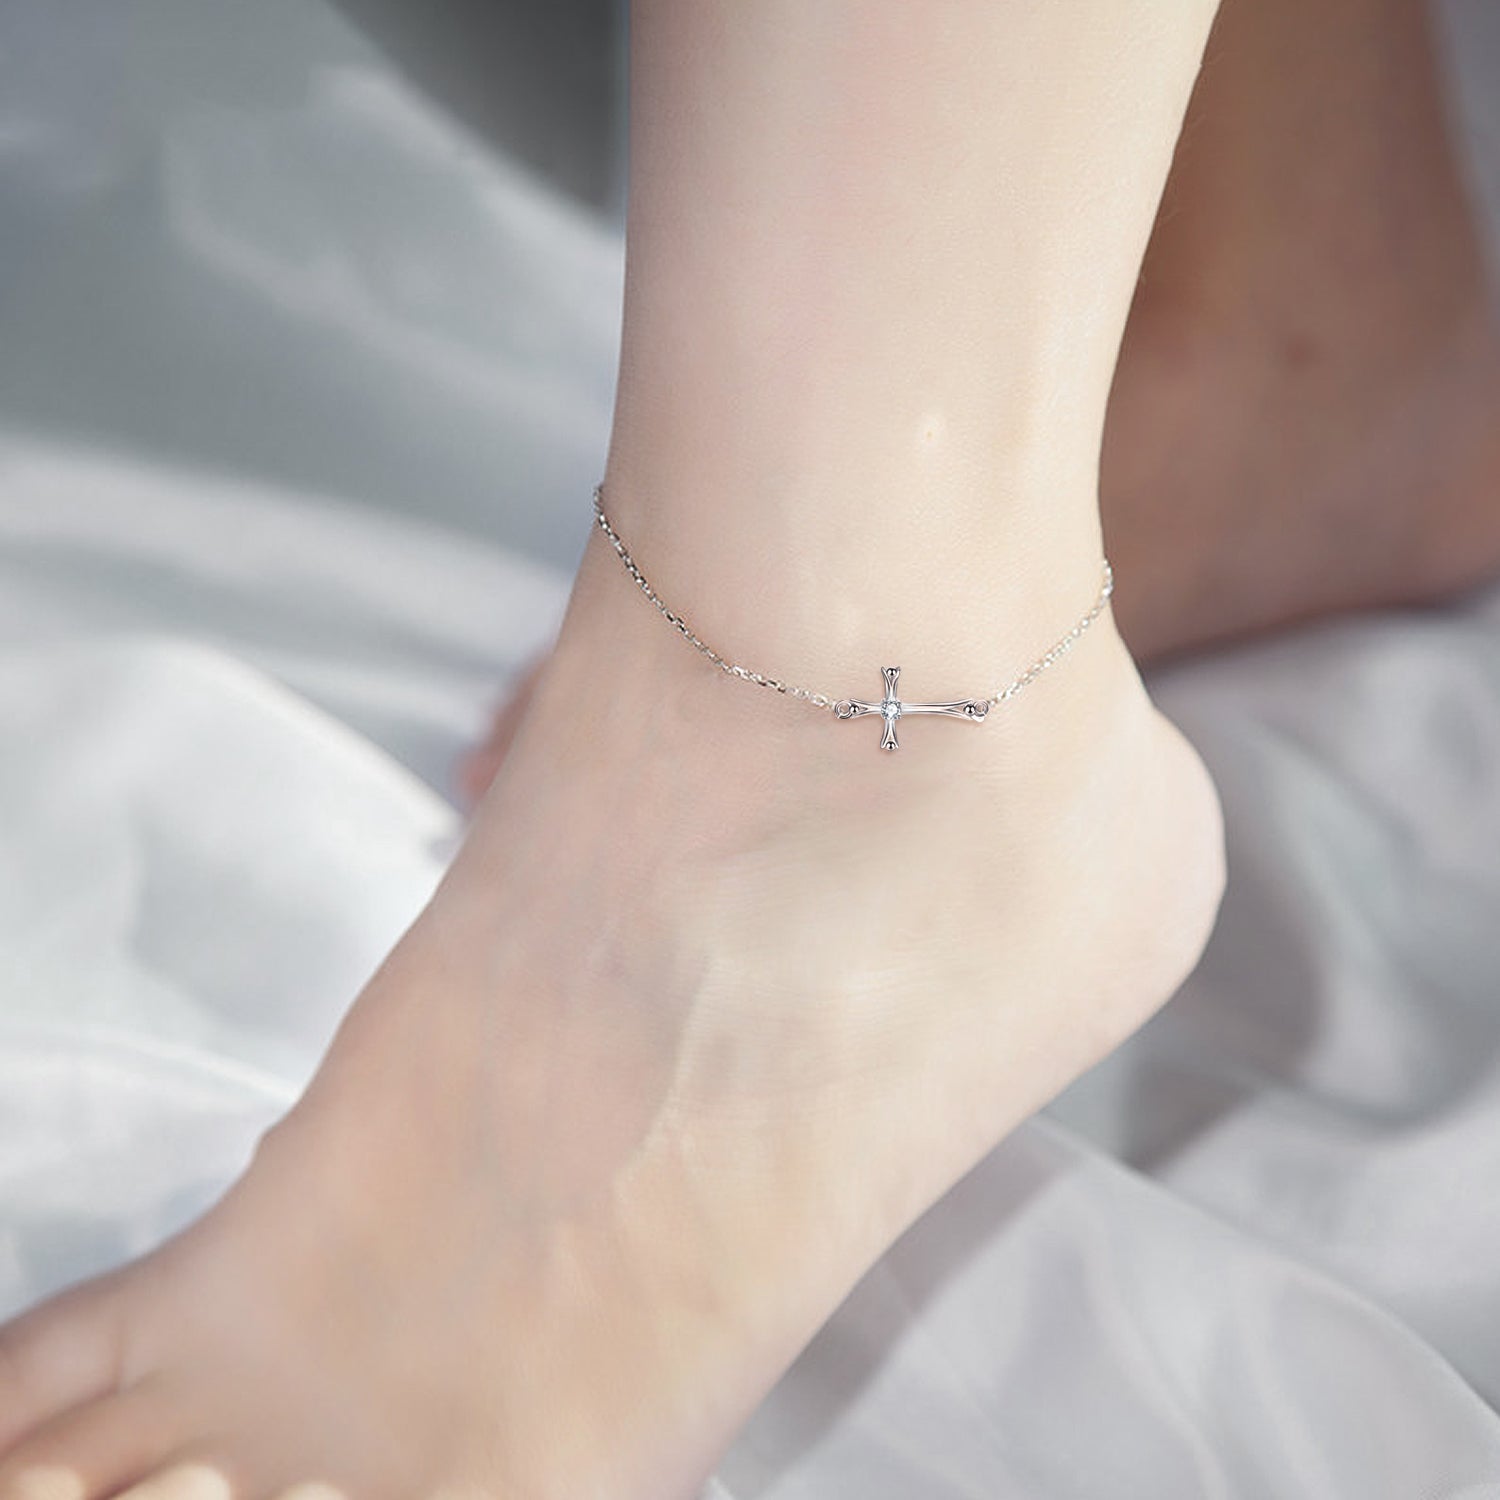 Sterling Silver Cross anklets Adjustable Chain Foot Ankle Bracelet Summer Jewelry